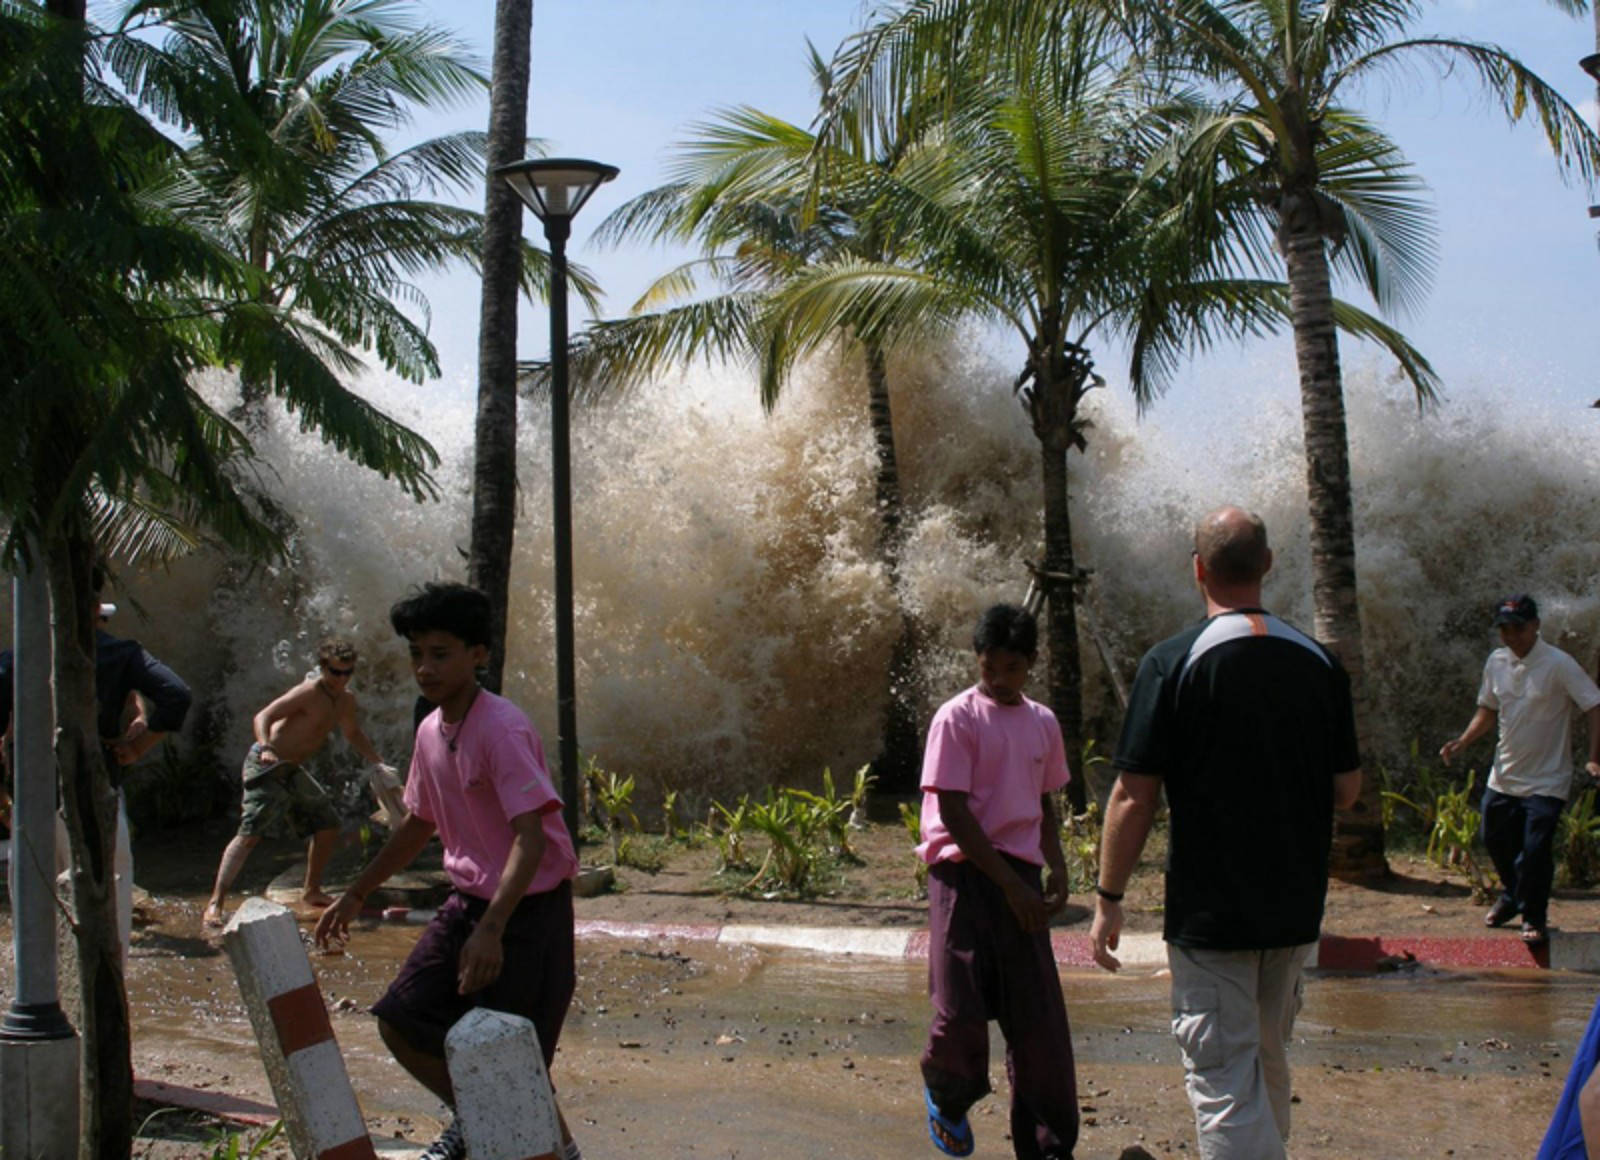 The first waves of the 2004 Indian Ocean Tsunami, which killed over 200,000 people, hit the shore.